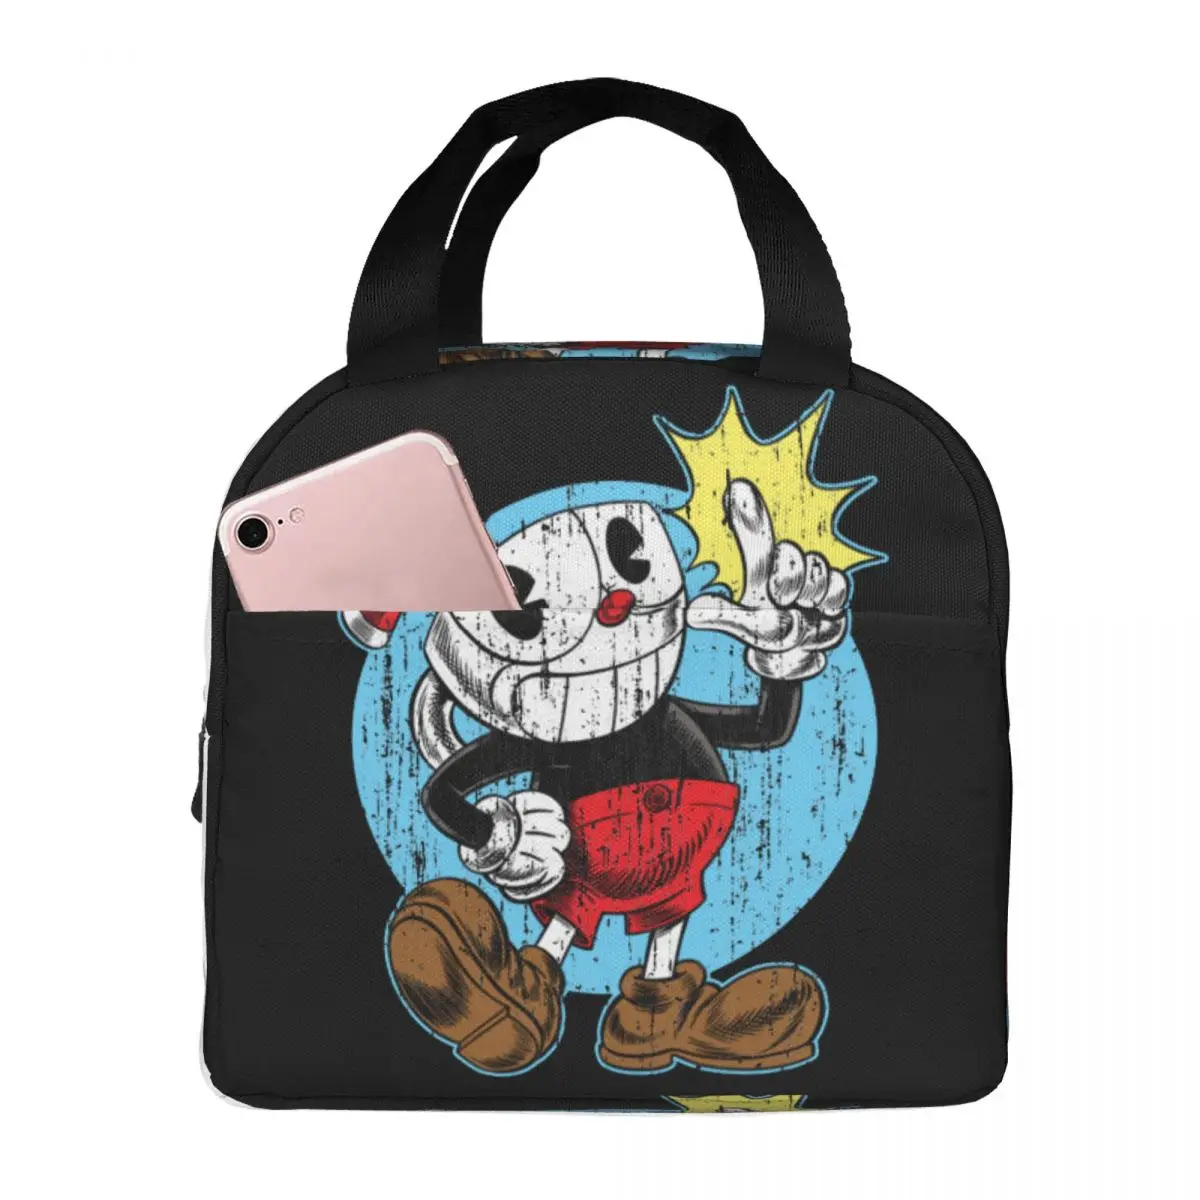 Cuphead Lunch Bags Waterproof Insulated Canvas Cooler Bag Mugman Cup Mouse Thermal Cold Food School Lunch Box for Women Kids